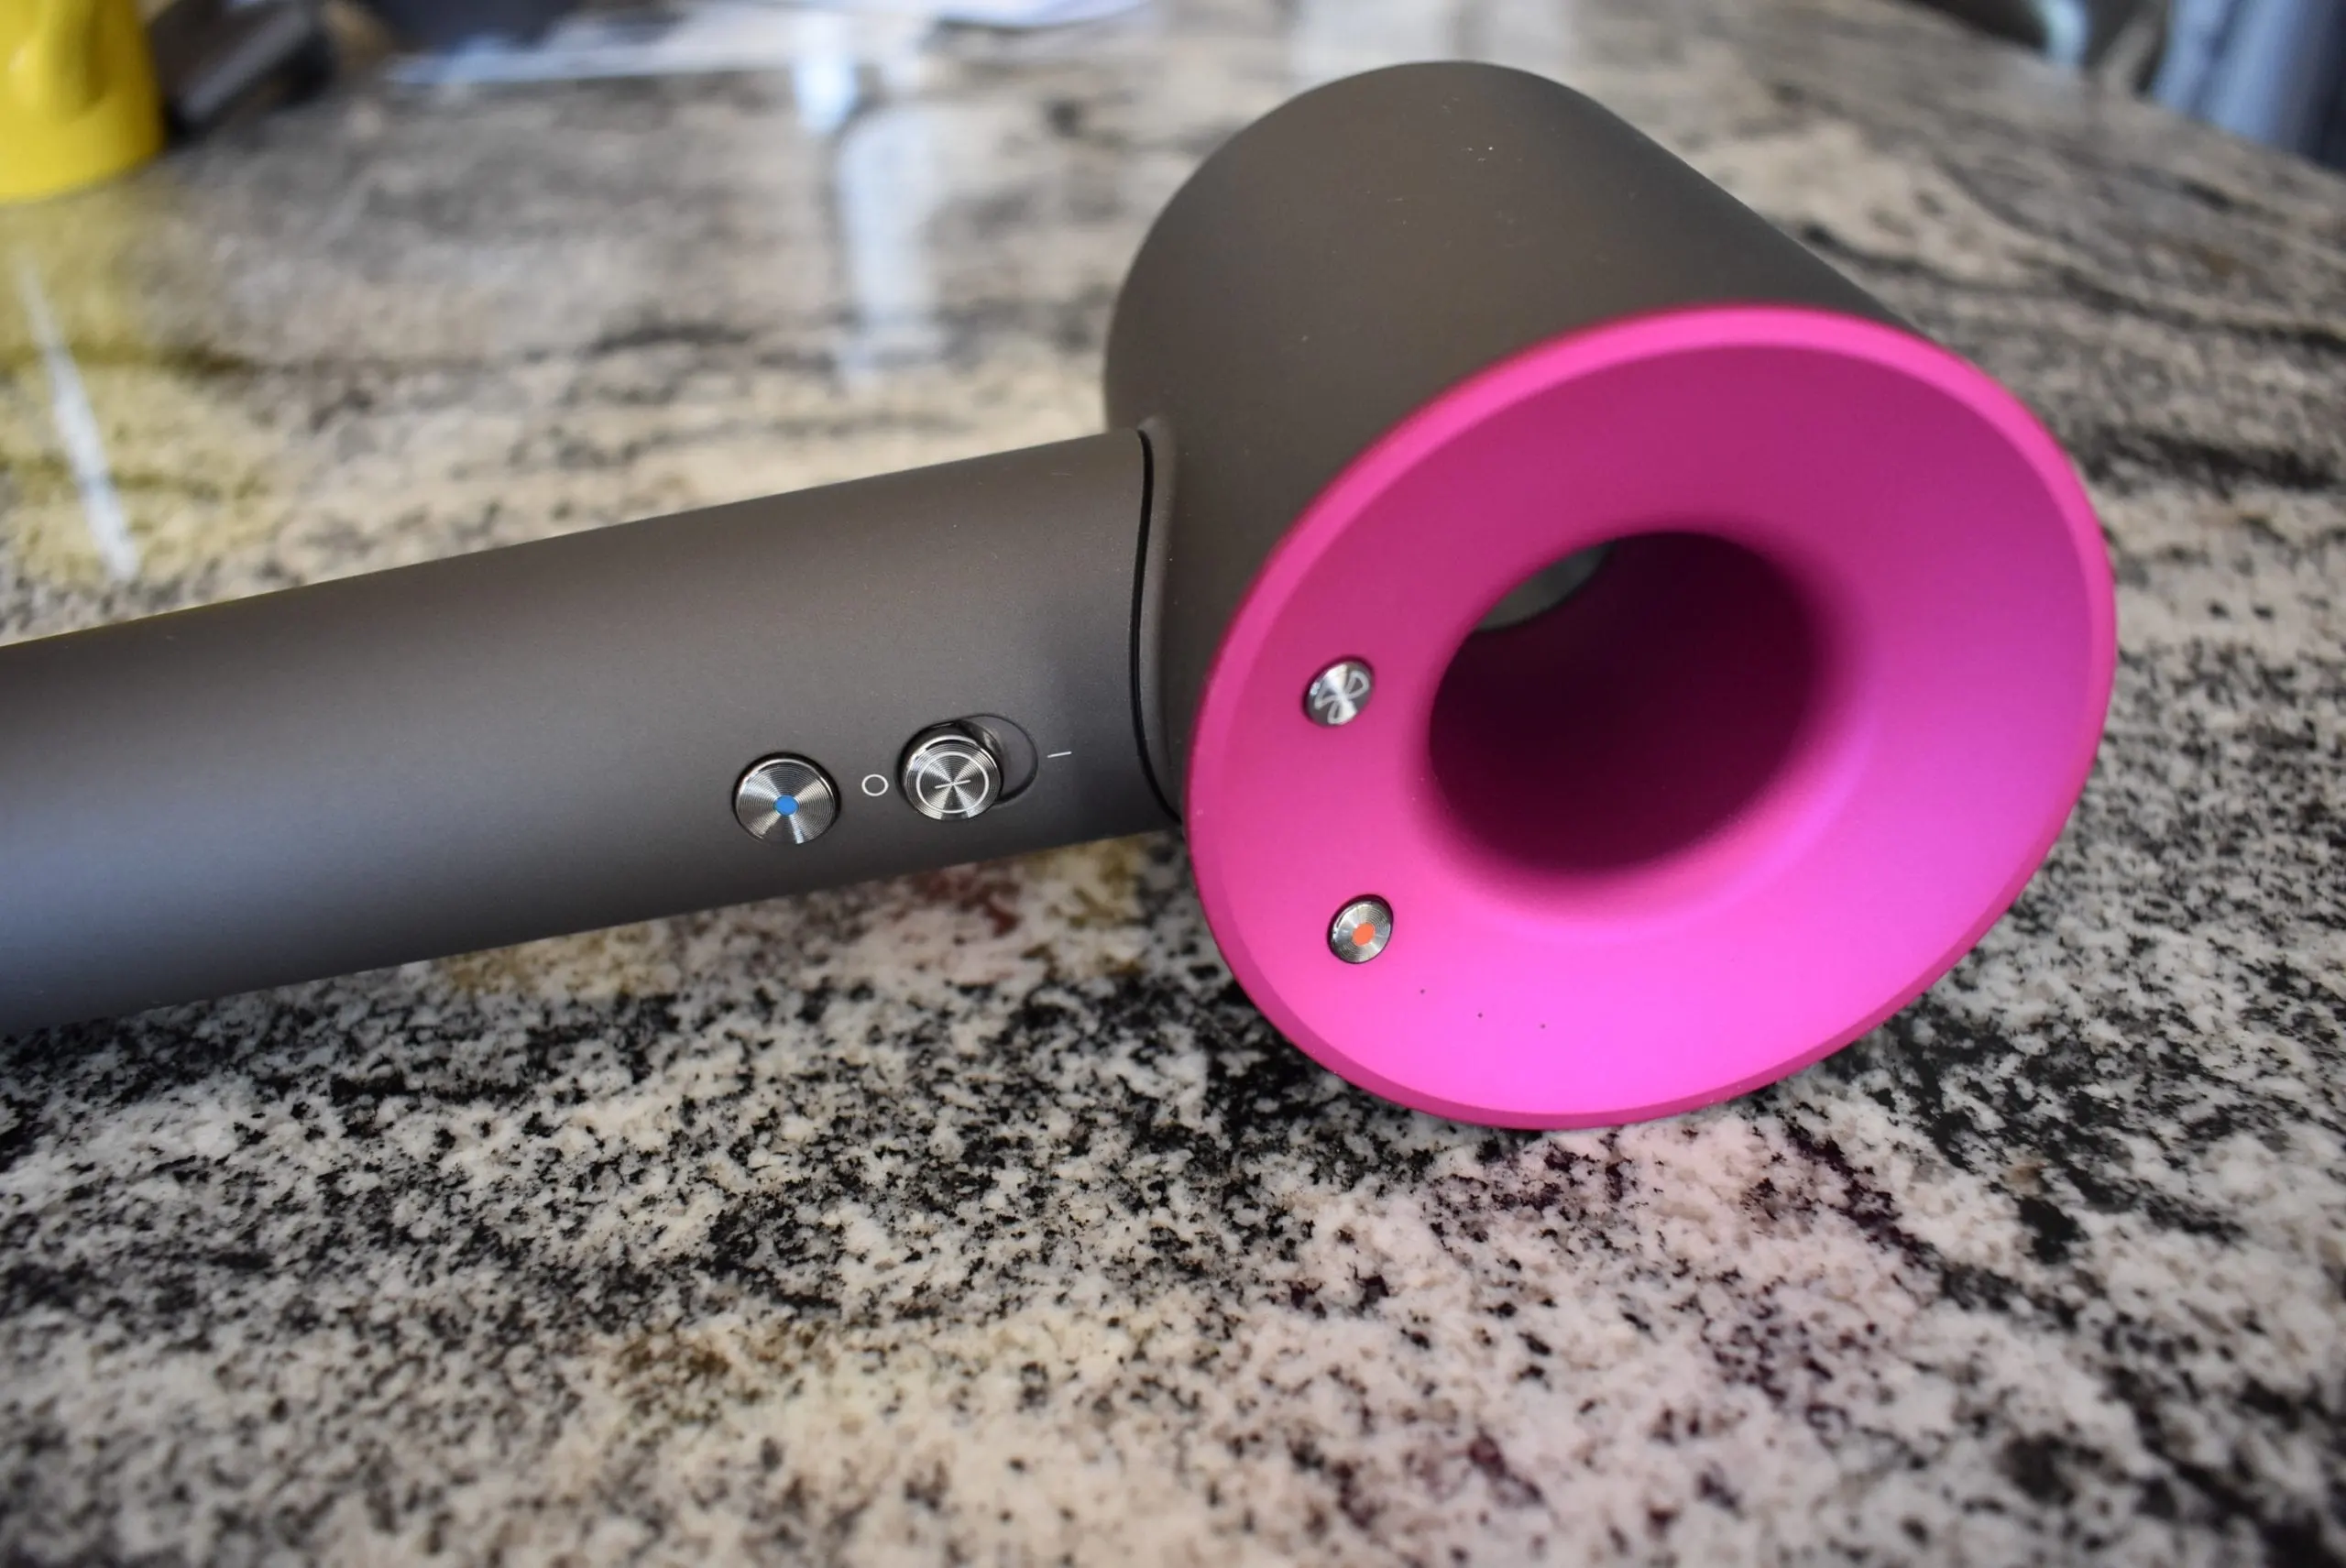 Close up of the dyson hair dryer and its buttons